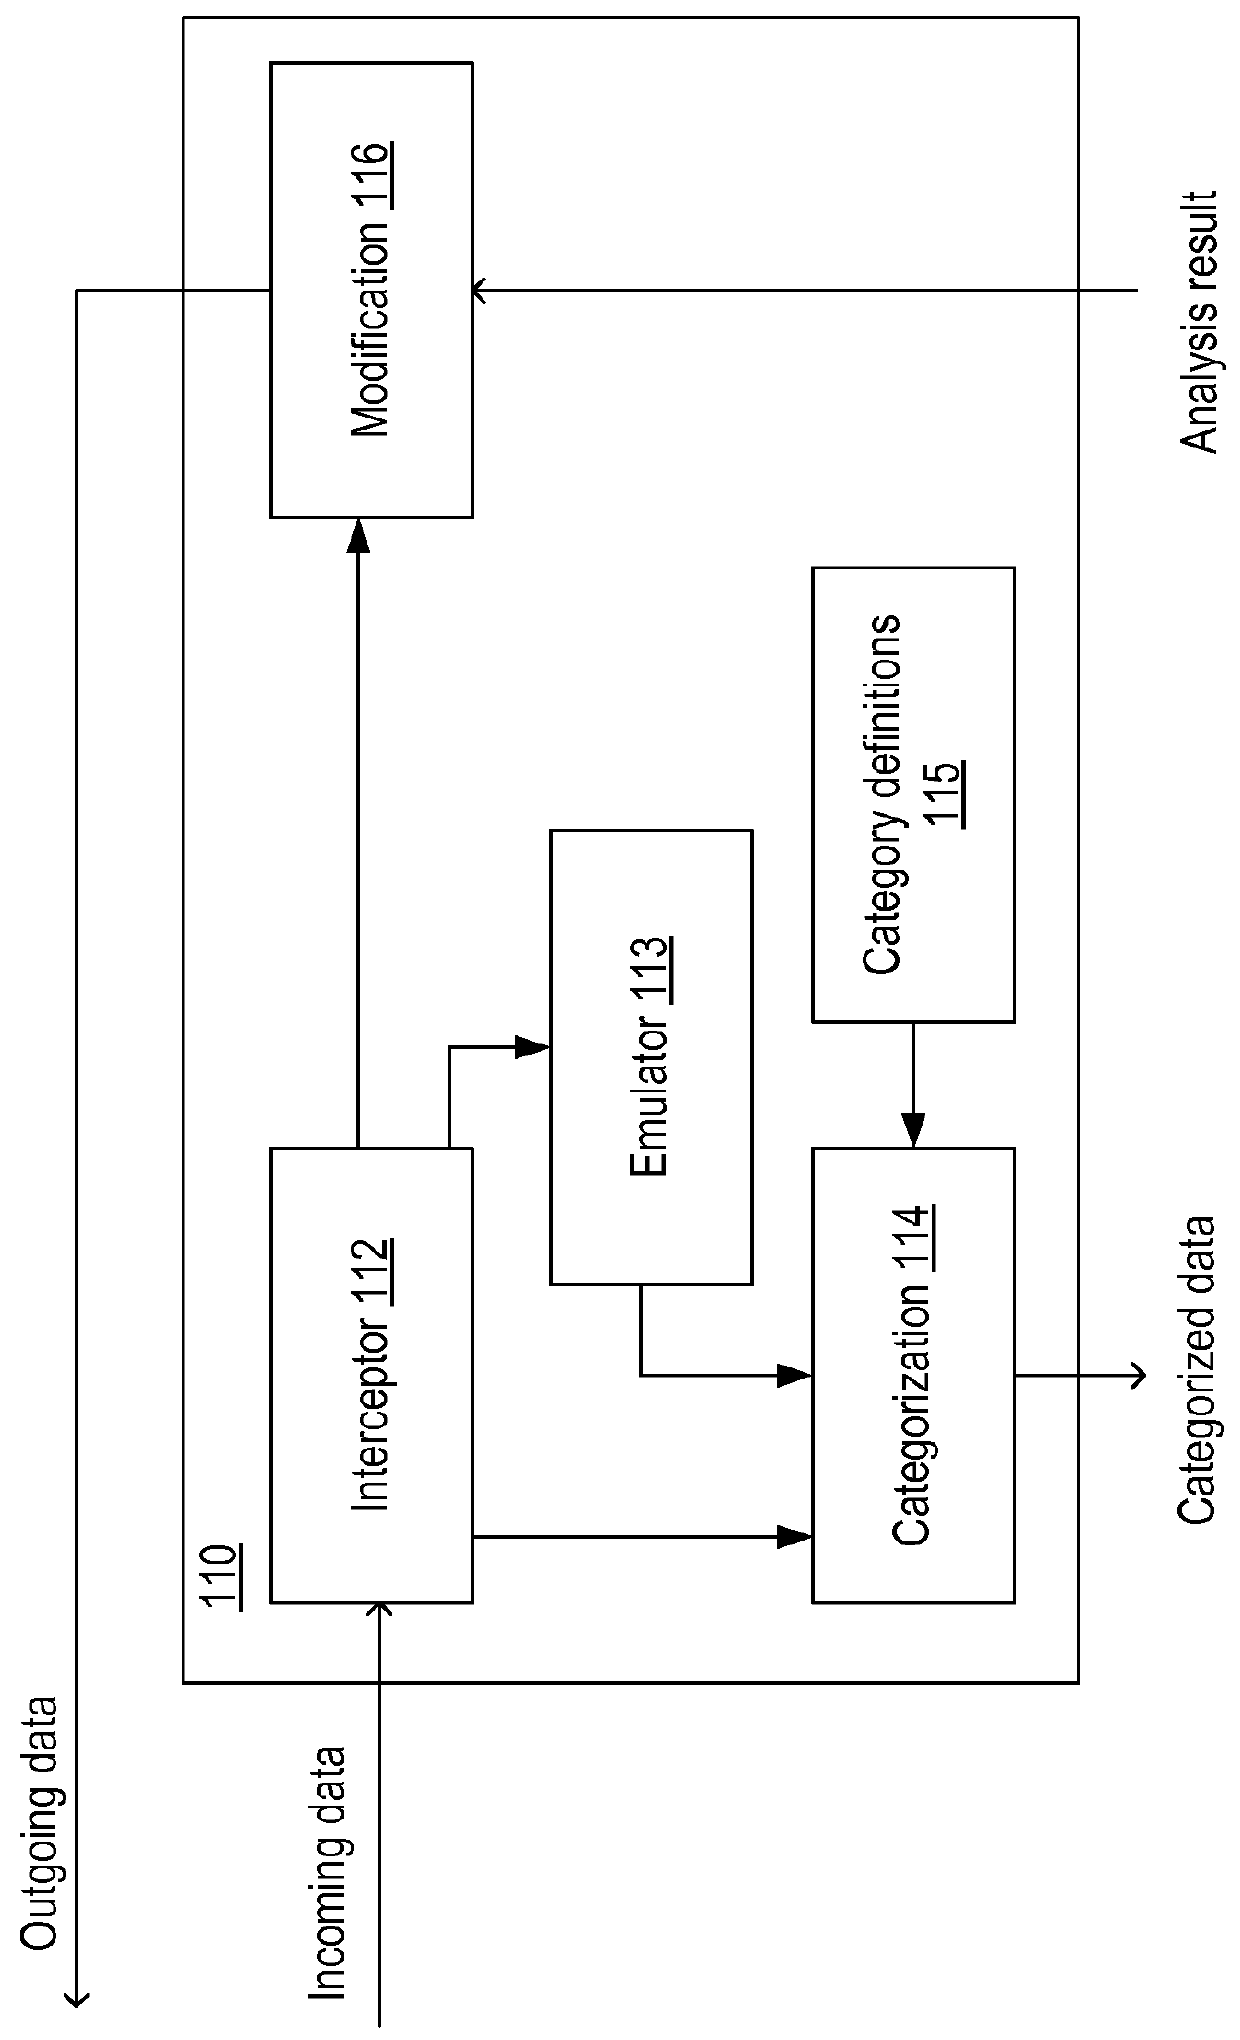 System and method for automated phishing detection rule evolution